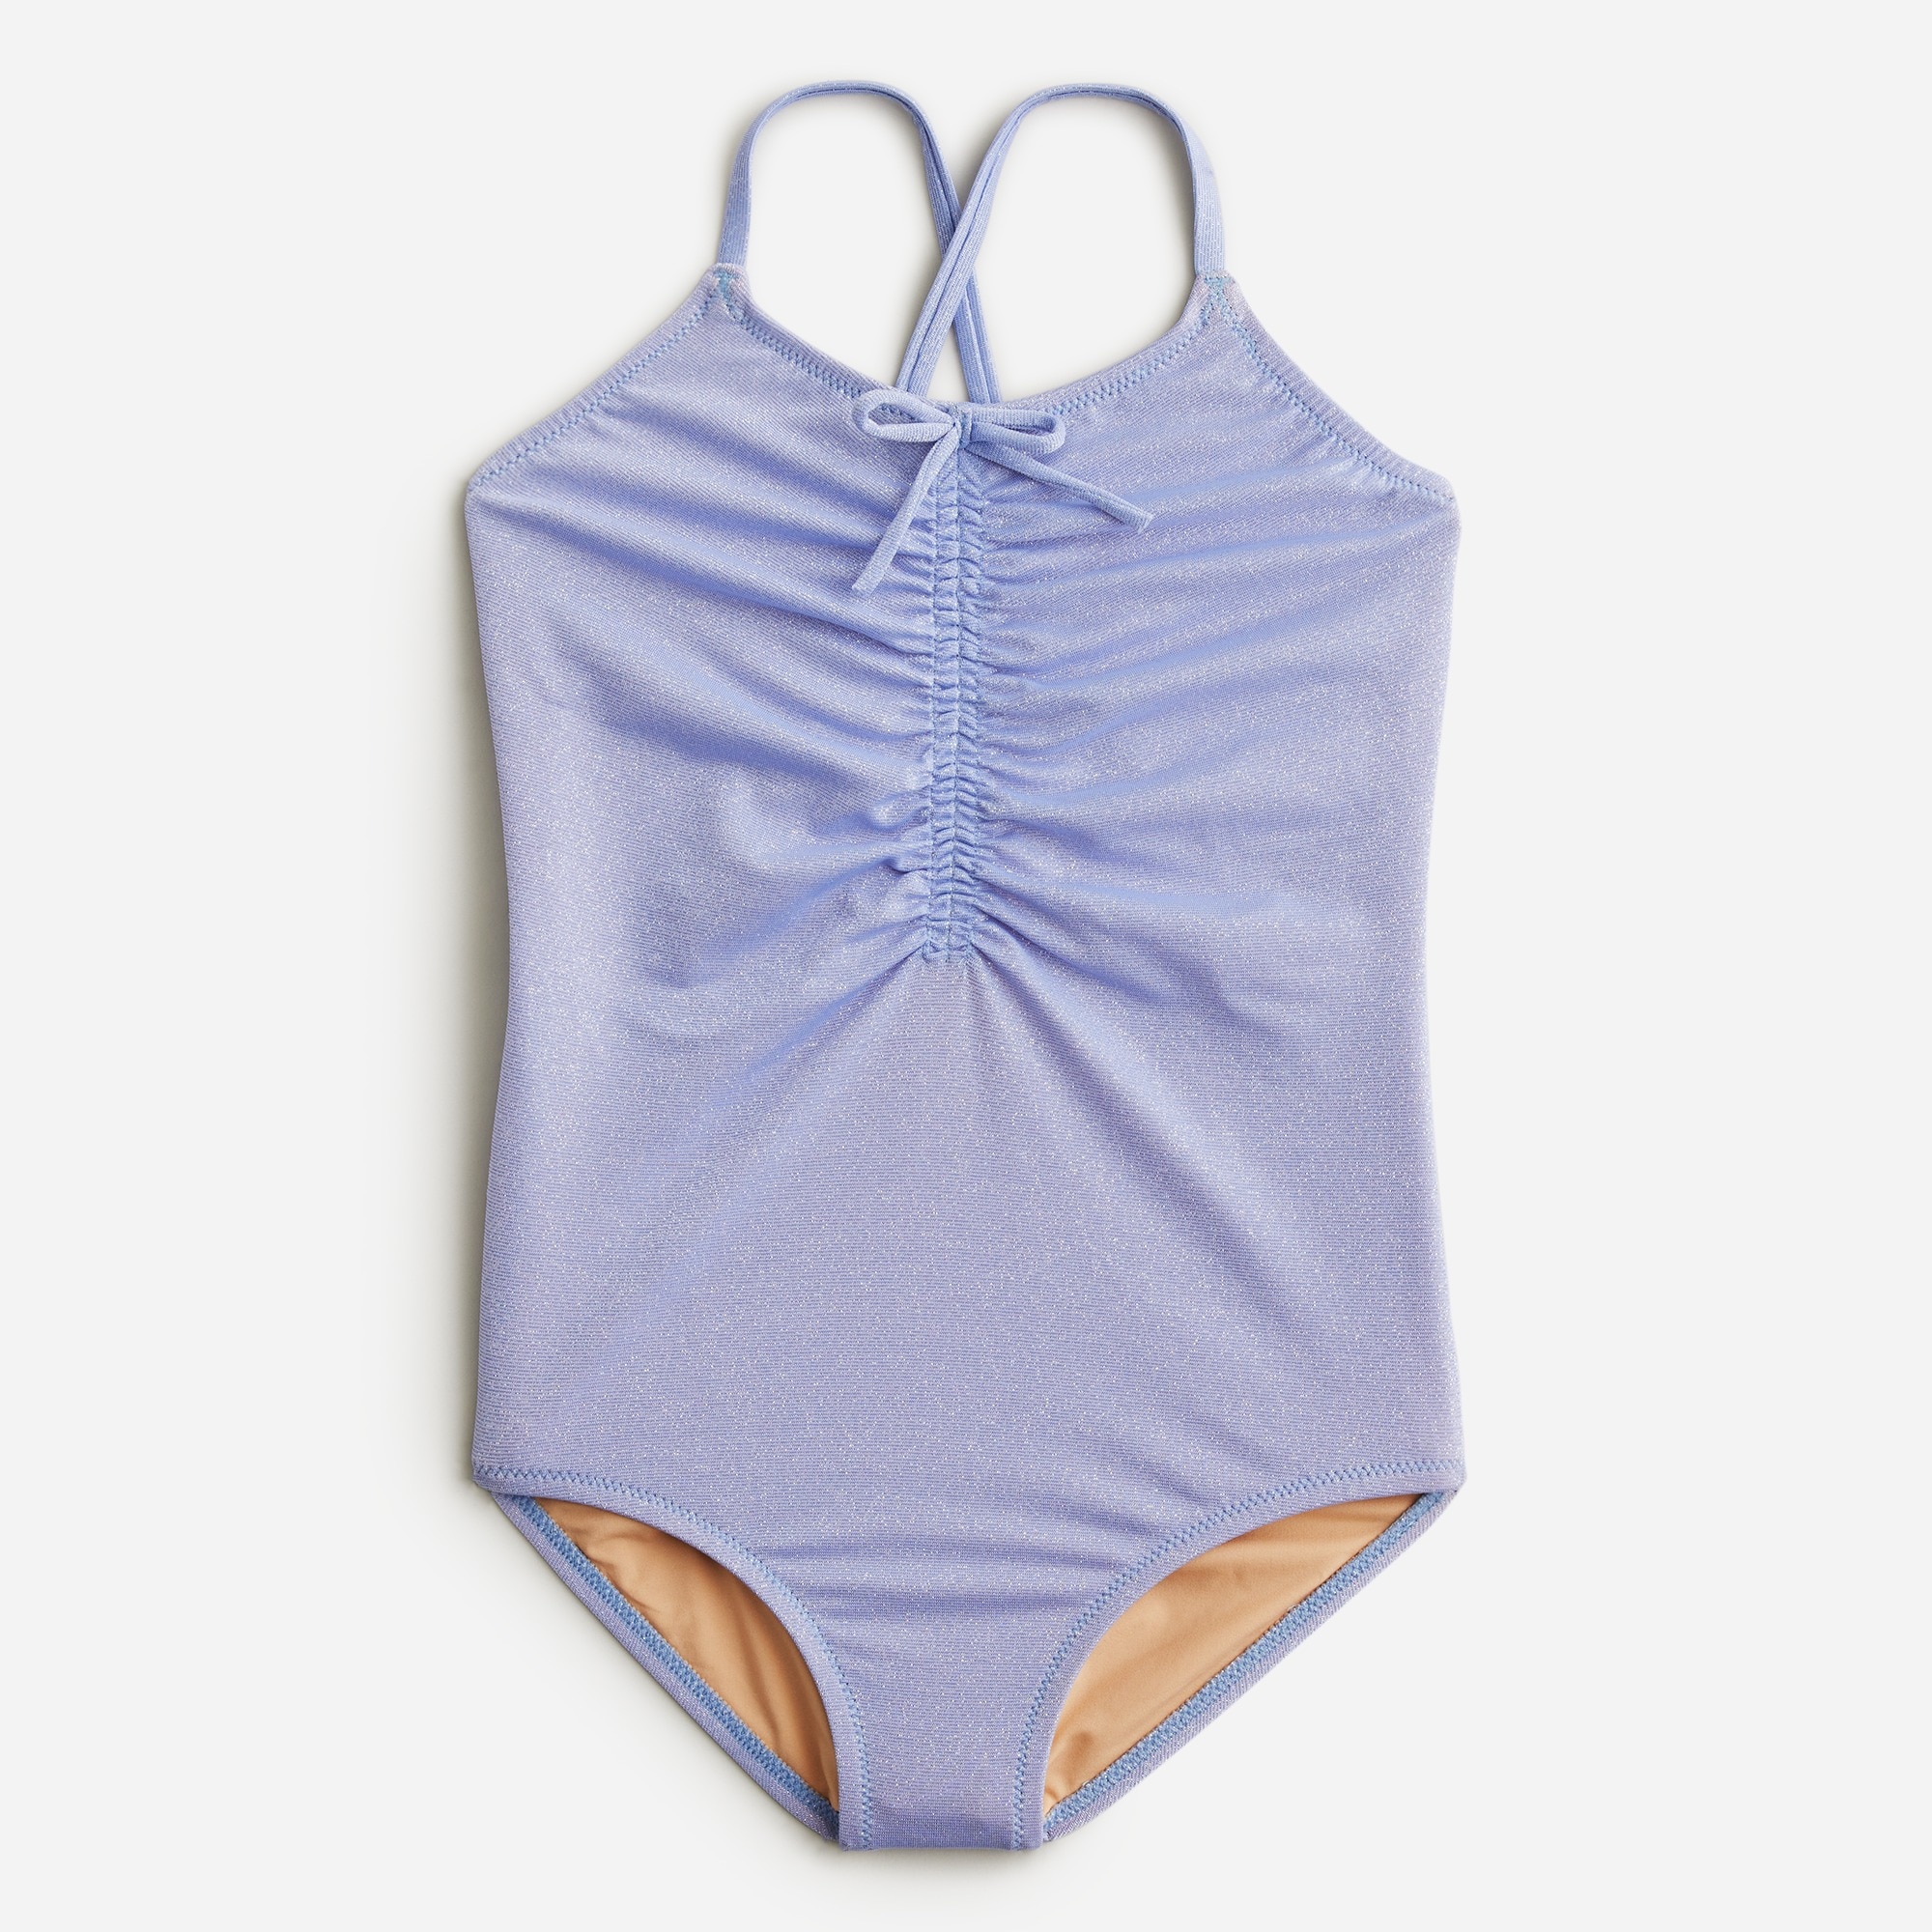 girls Girls' ruched shimmer one-piece swimsuit with UPF 50+